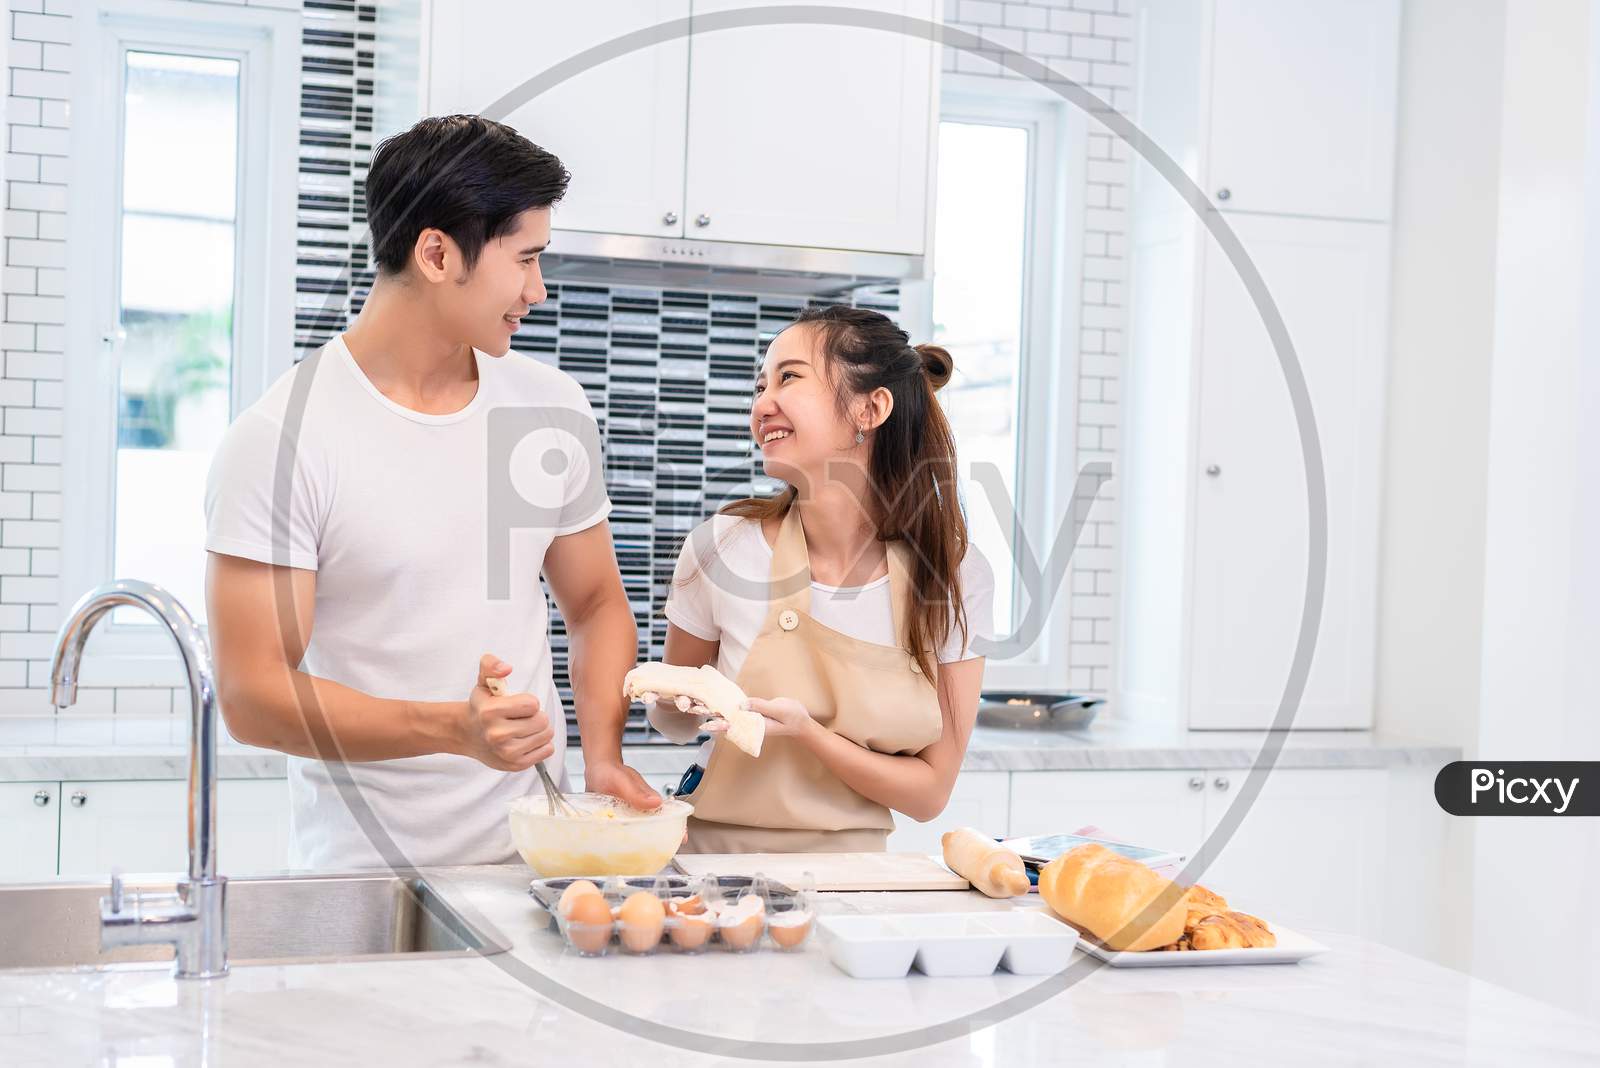 Asian Couples Cooking And Baking Cake Together In Kitchen Room. Man And Woman Looking To Each Other At Home. Love And Happiness Concept Sweet Honeymoon And Valentine Day Theme